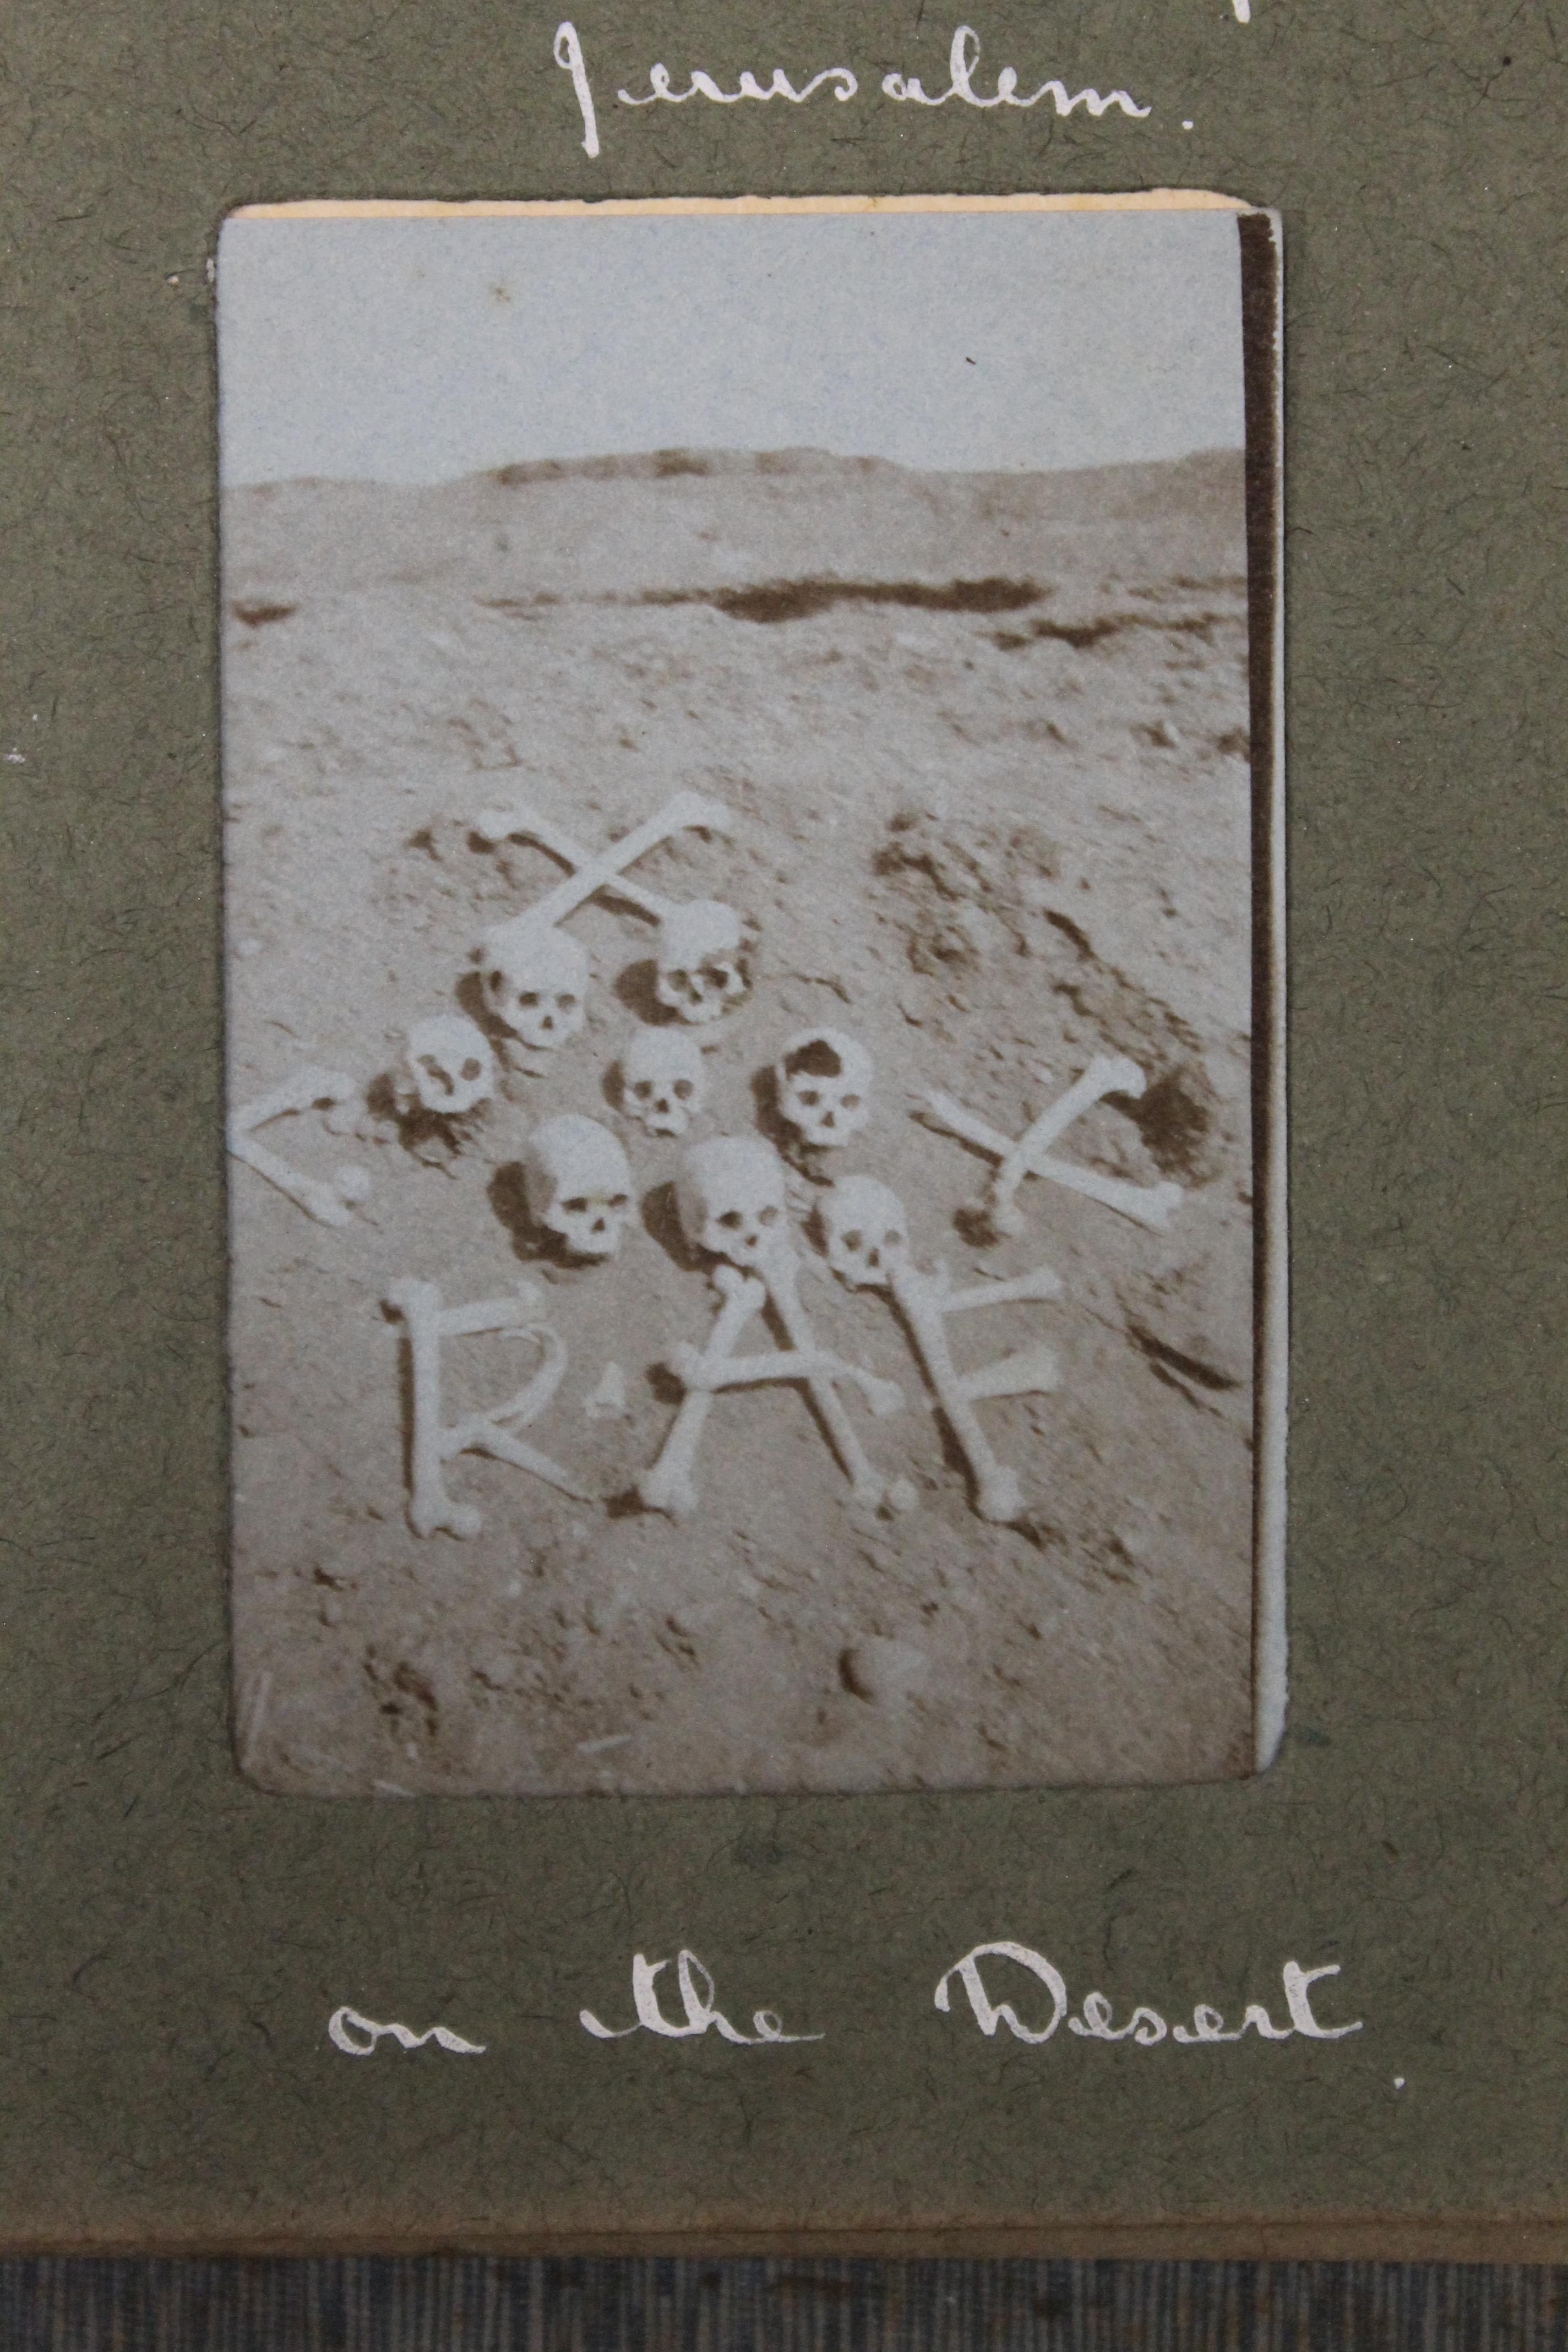 A 1920s photograph album depicting Iraq and Egypt. - Image 5 of 5